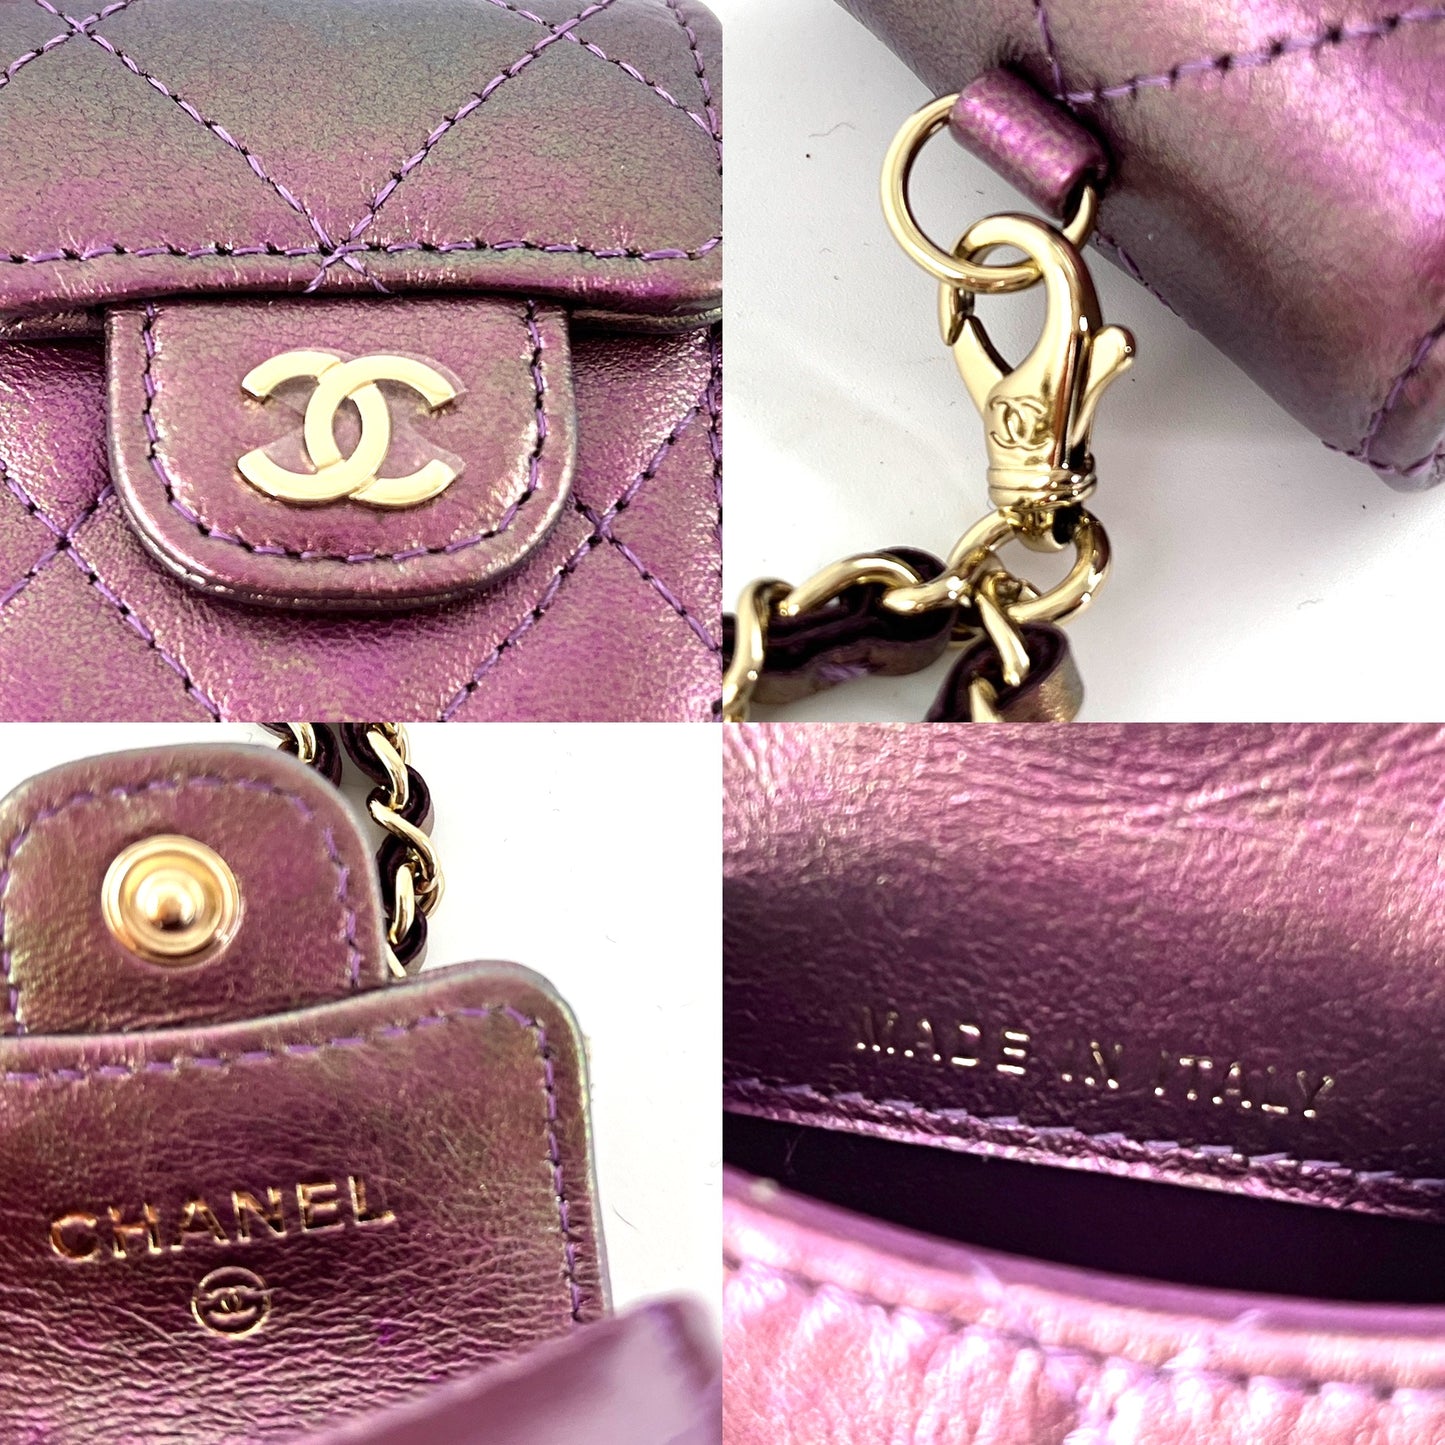 CHANEL 2020 Iridescent Purple AirPods Case Holder with Chain